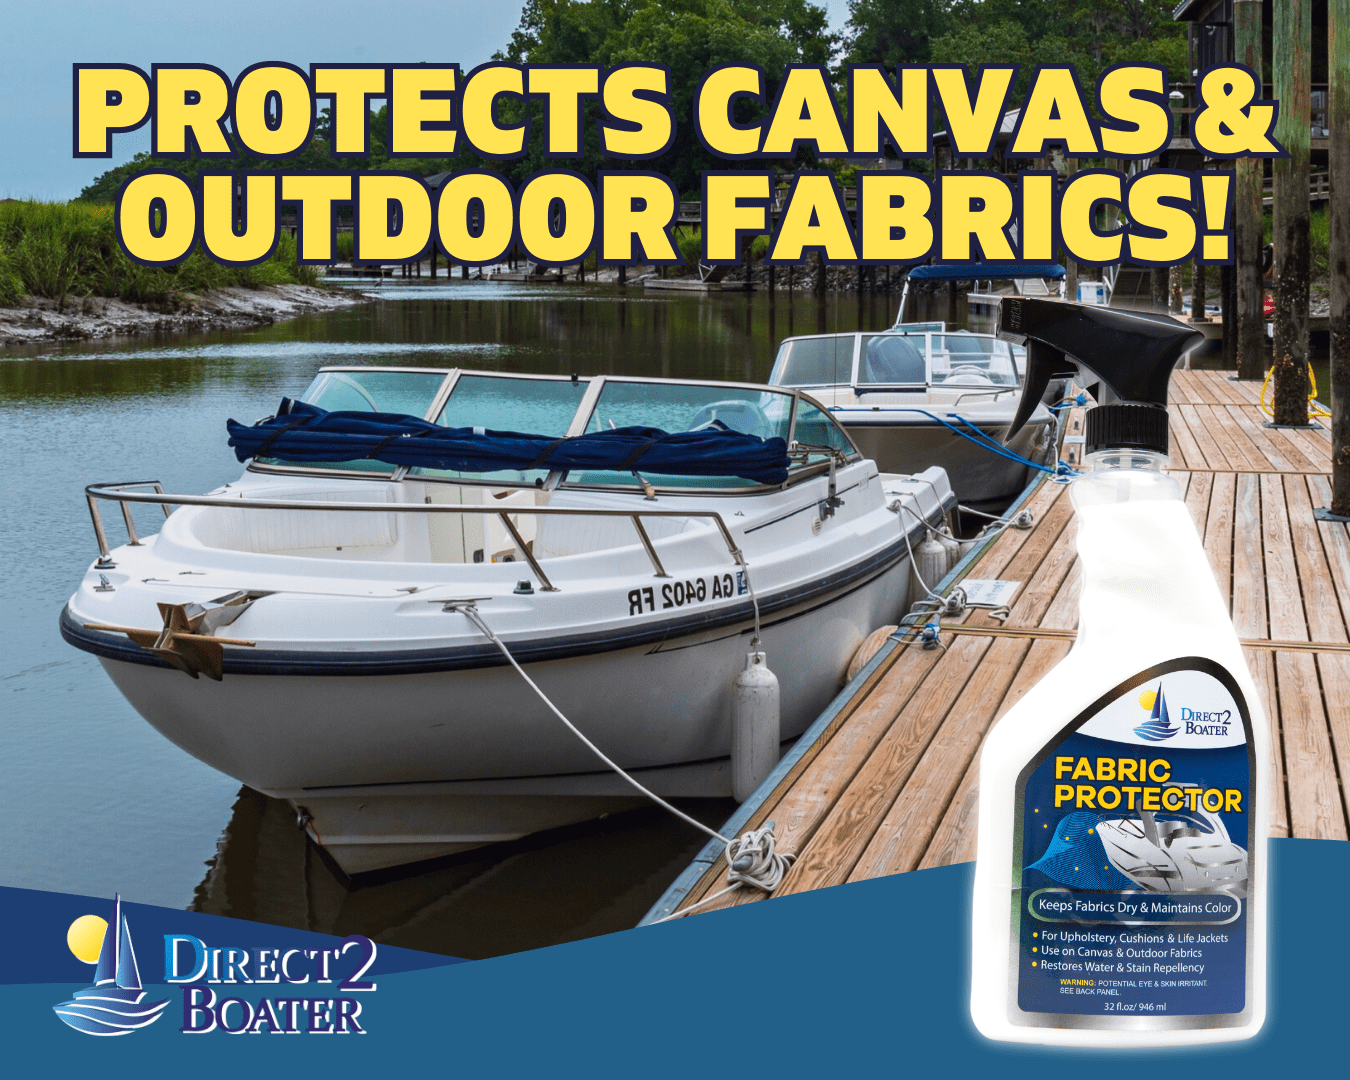  Fabric Waterproof Spray Heavy Duty Waterproofing Spray Fabric  Protector Spray and Repellent for Outdoor Canvas Boat Tops, Vinyl Seats,  Tent Water Proof, Boots, Jacket